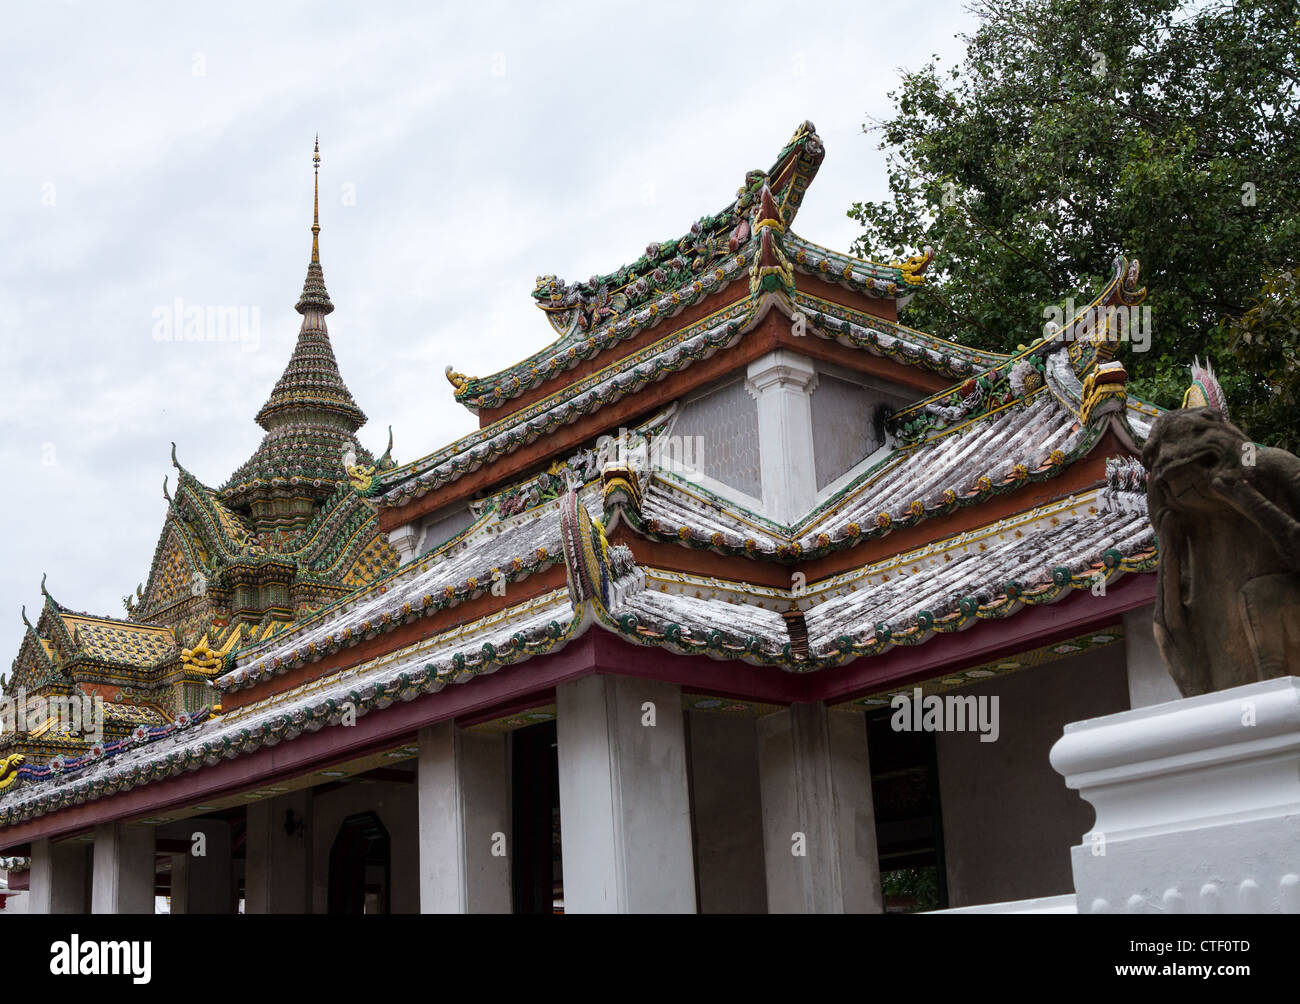 Detail of roofs and towers of Wat Po temple in Thailand Stock Photo